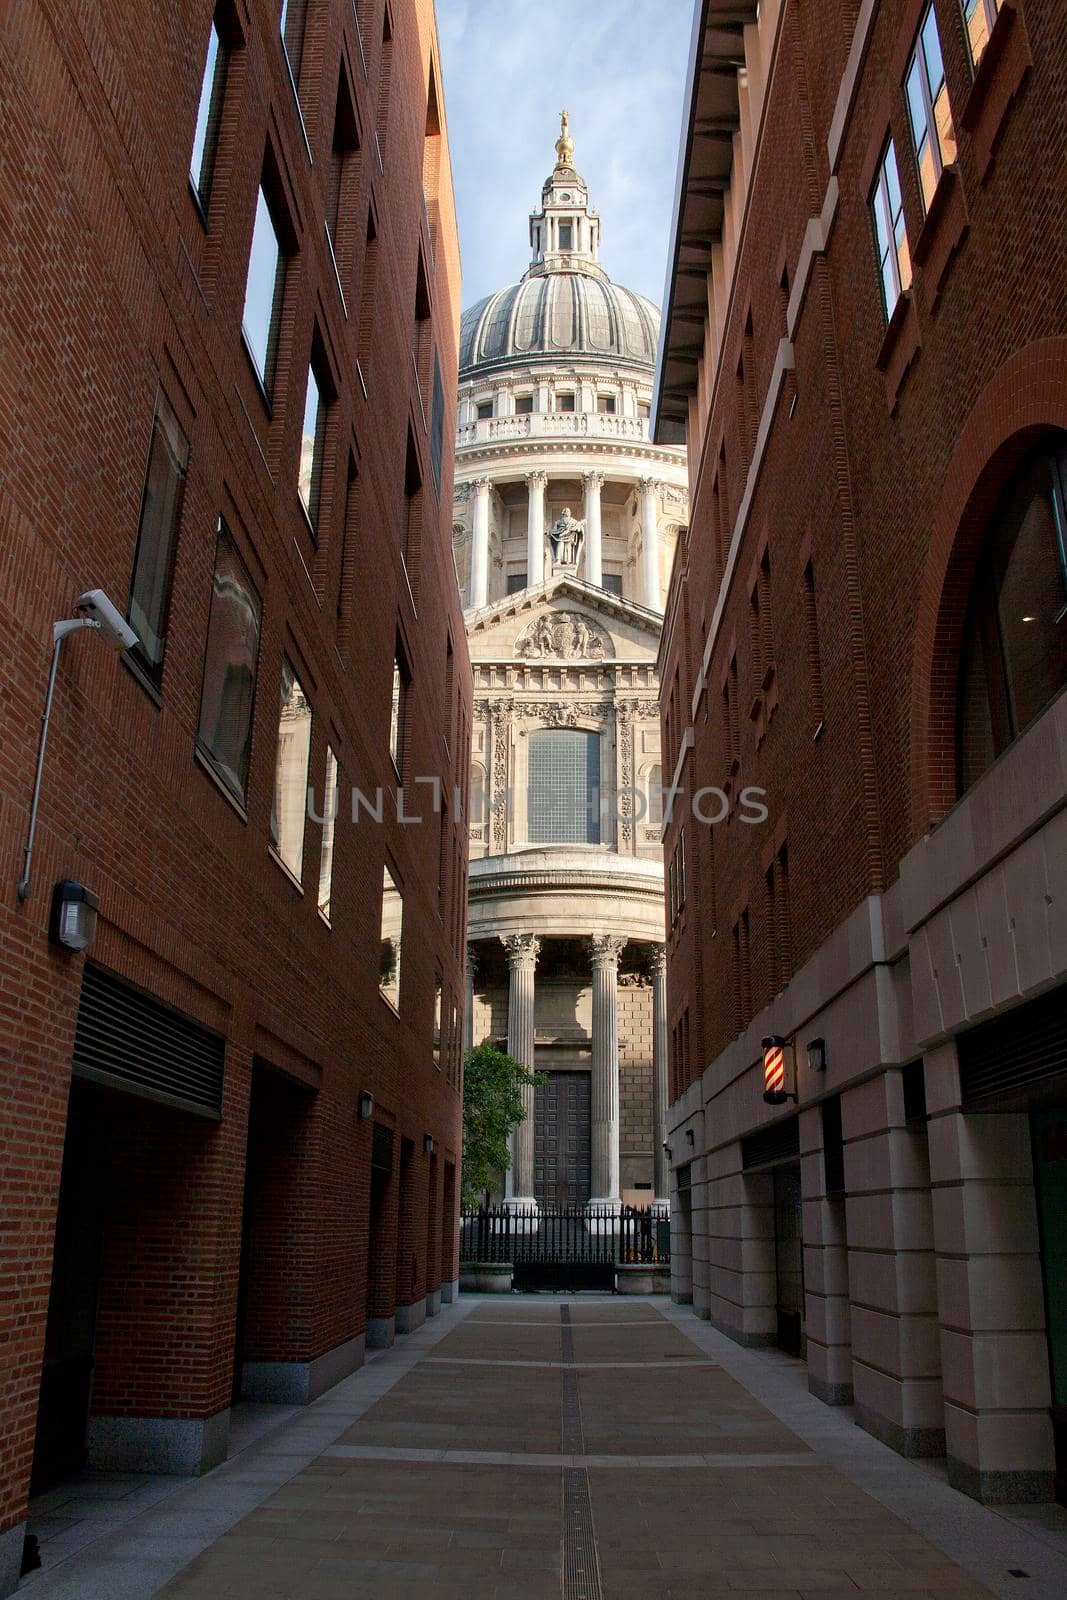 St Pauls Cathedral seen from Canon Aly London